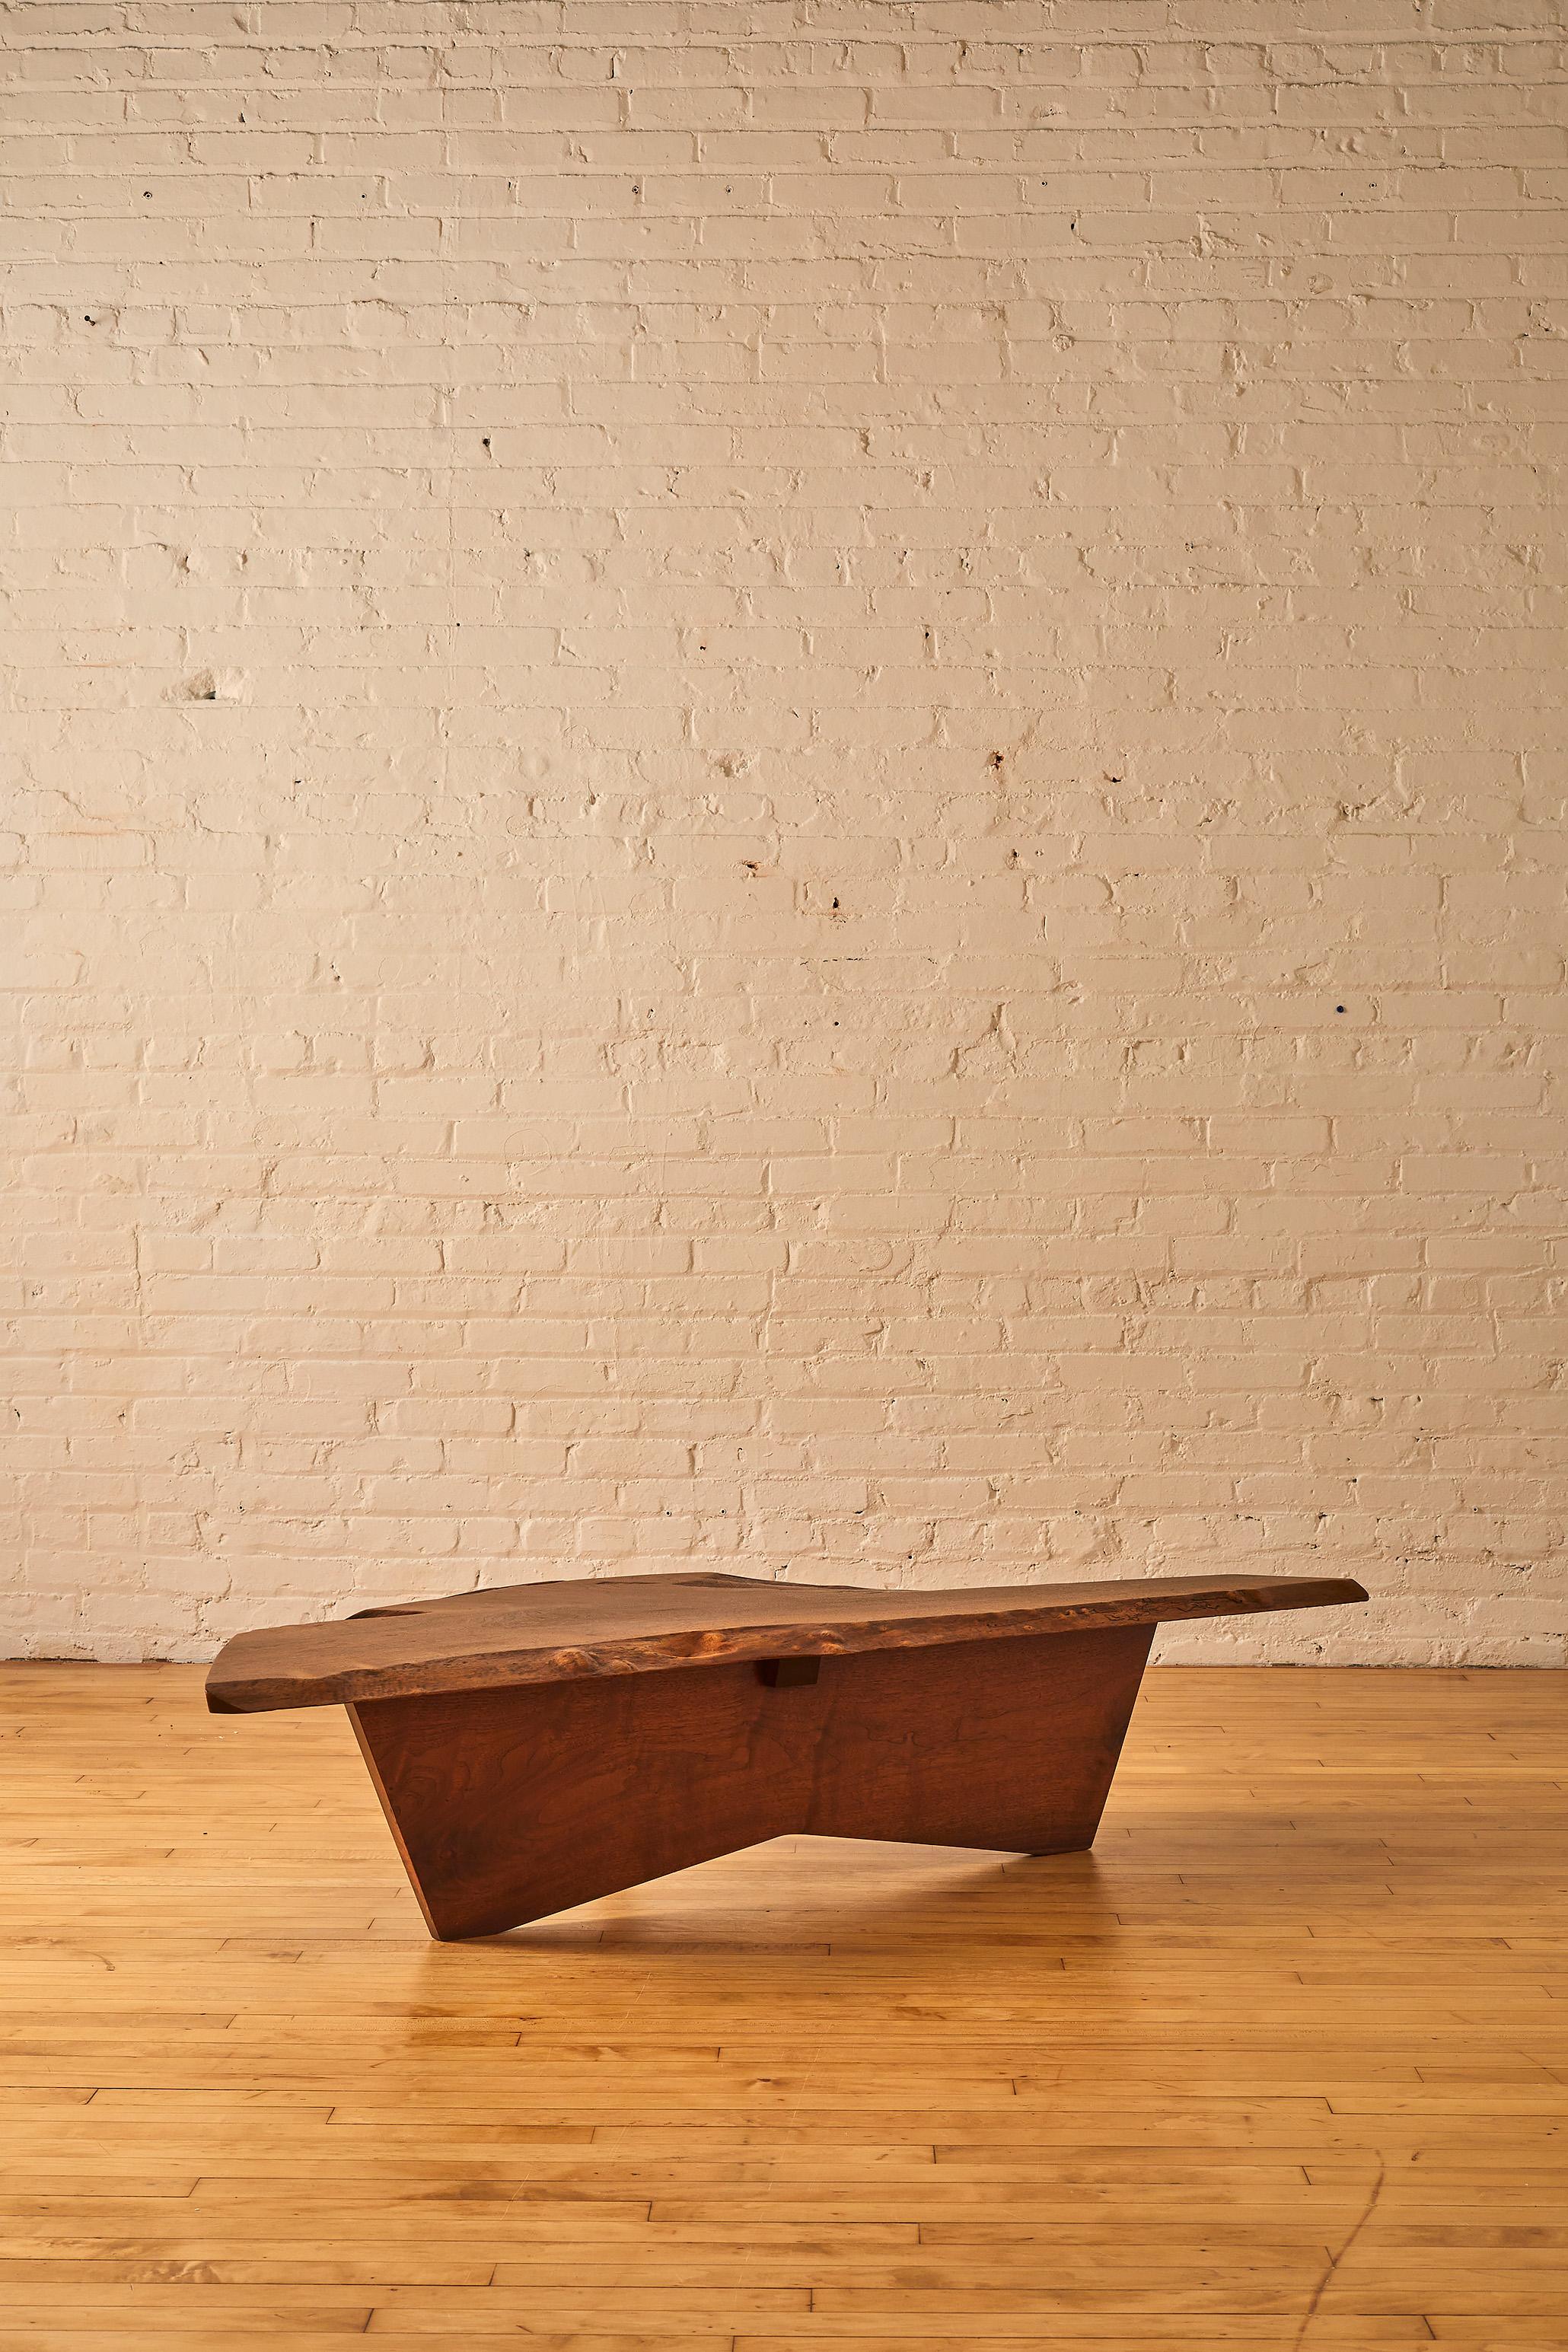 An Original Walnut Coffee Table by George Nakashima. 

About George Nakashima:

George Katsutoshi Nakashima was an American woodworker, architect, and furniture maker who was one of the leading innovators of 20th century furniture design and a